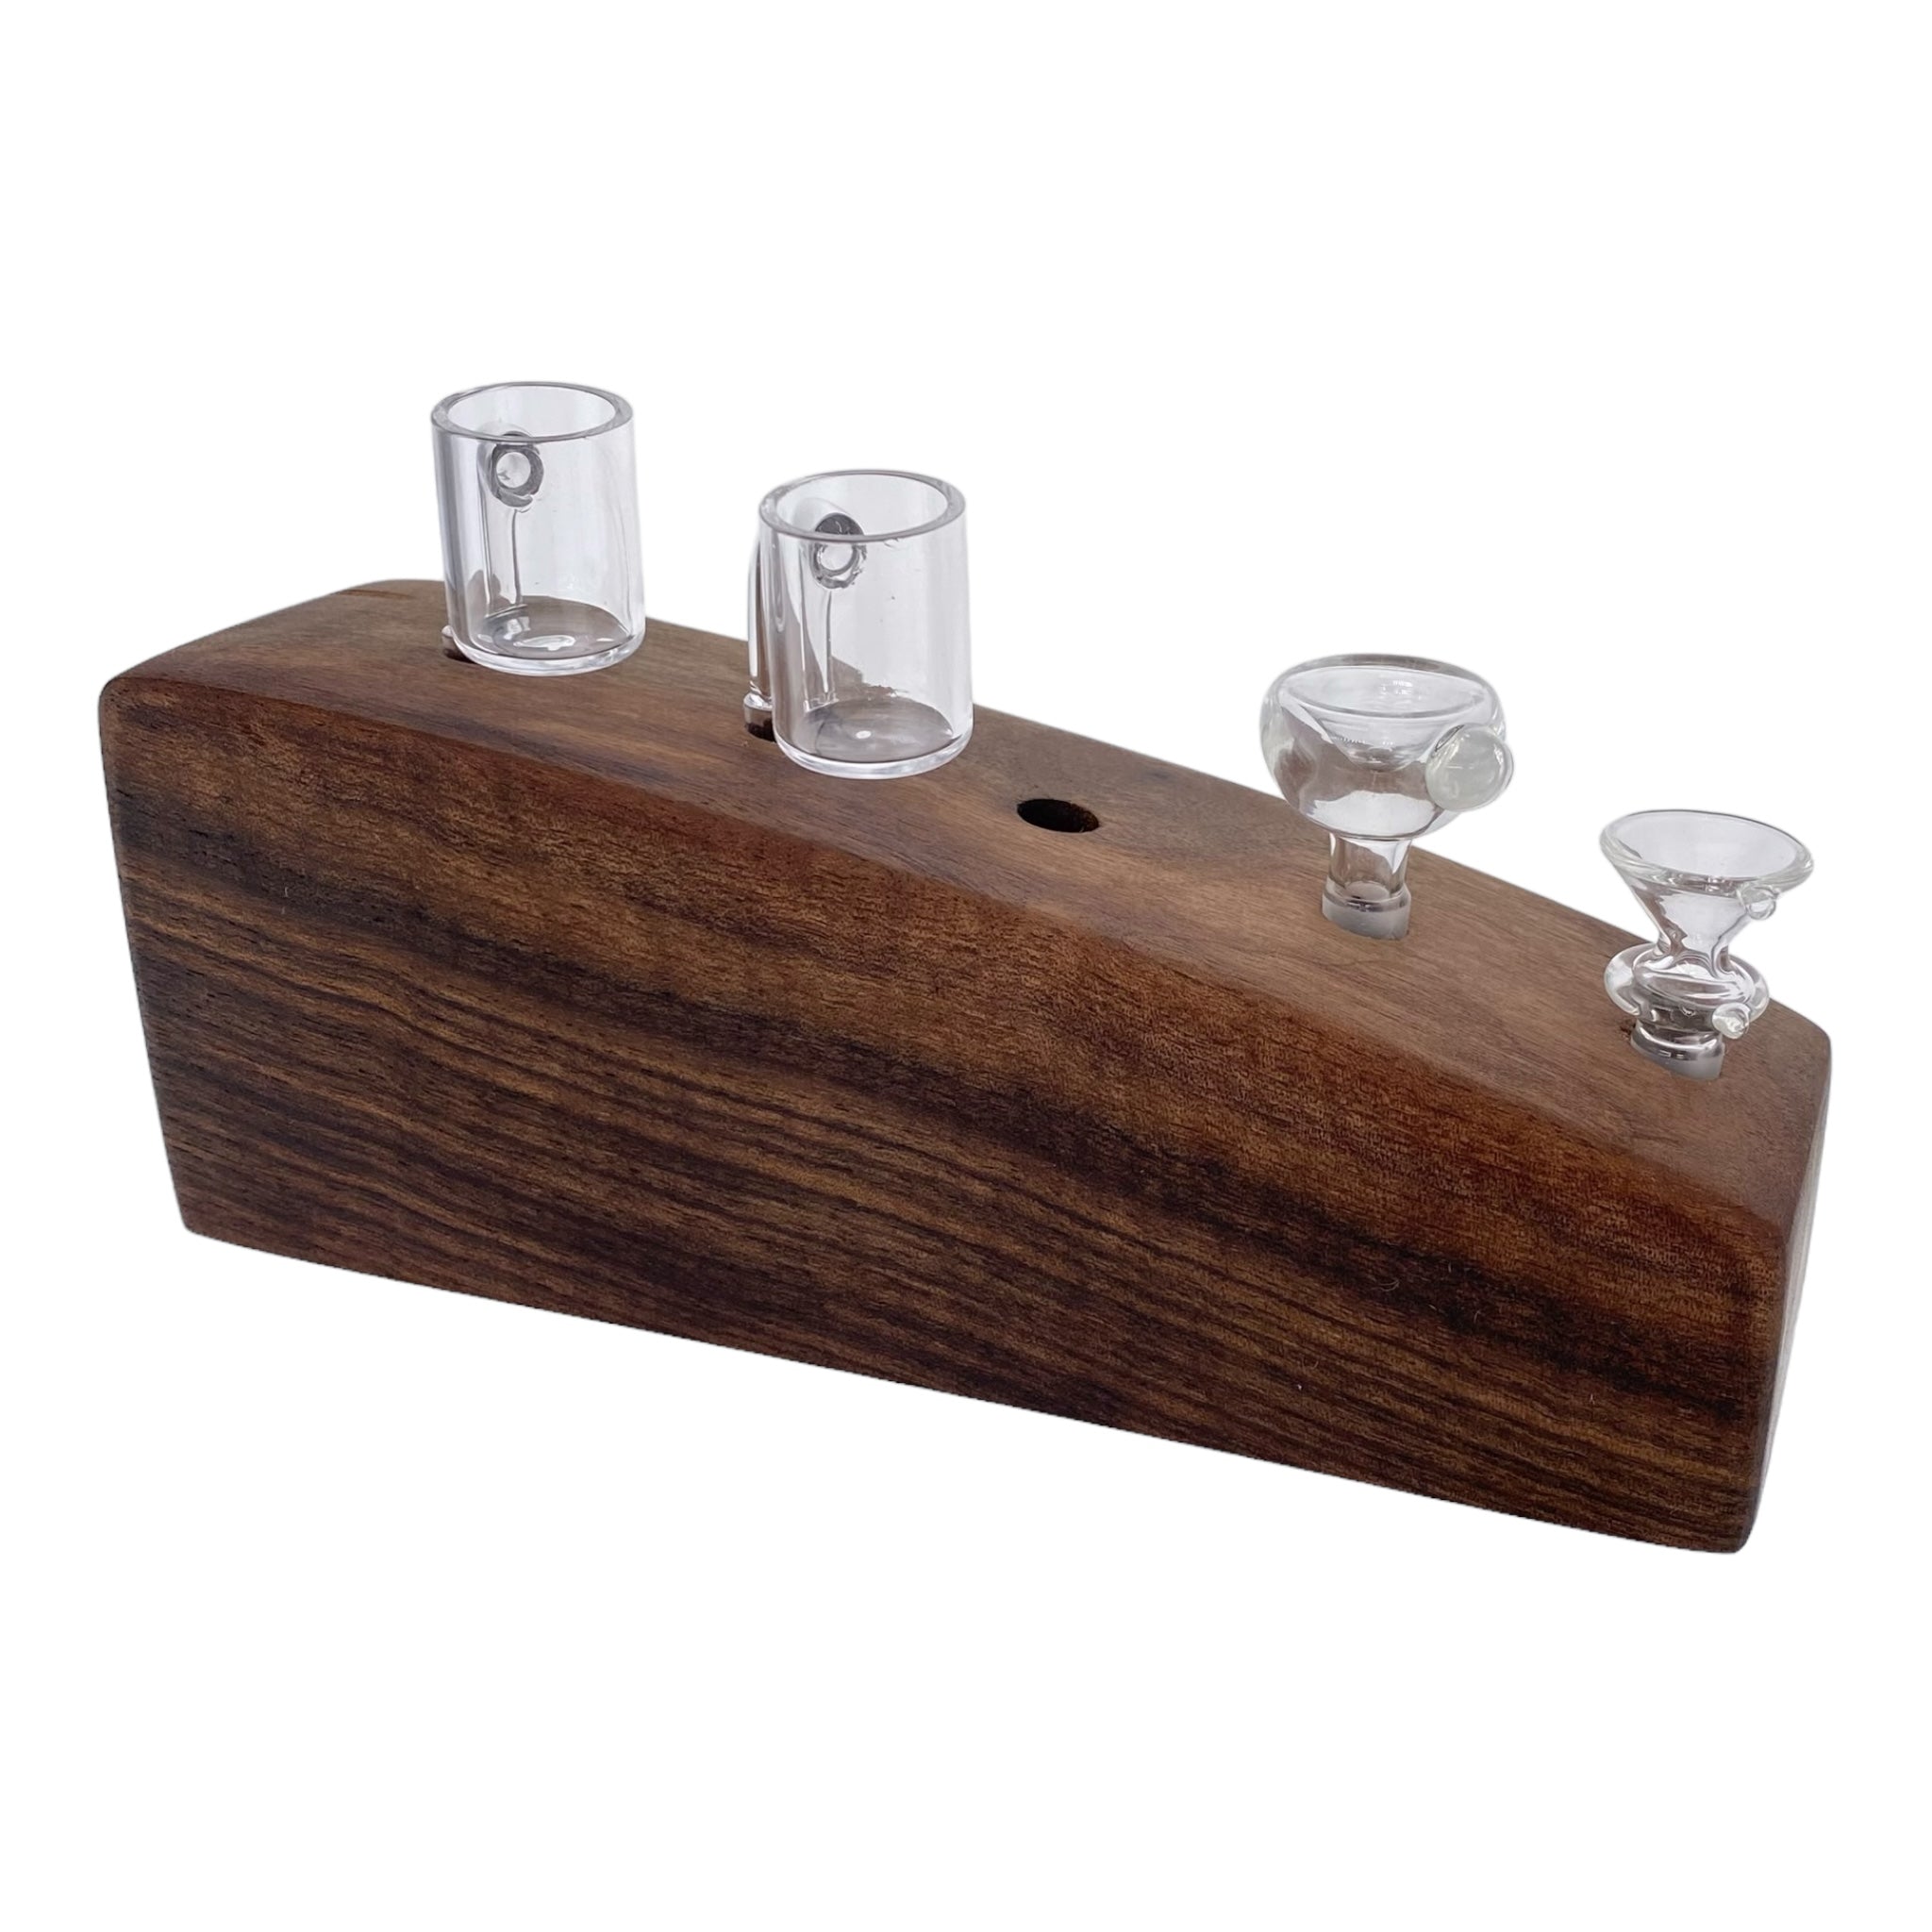 5 Hole Wood Display Stand Holder For 10mm Bong Bowl Pieces Or Quartz Bangers - Black Walnut